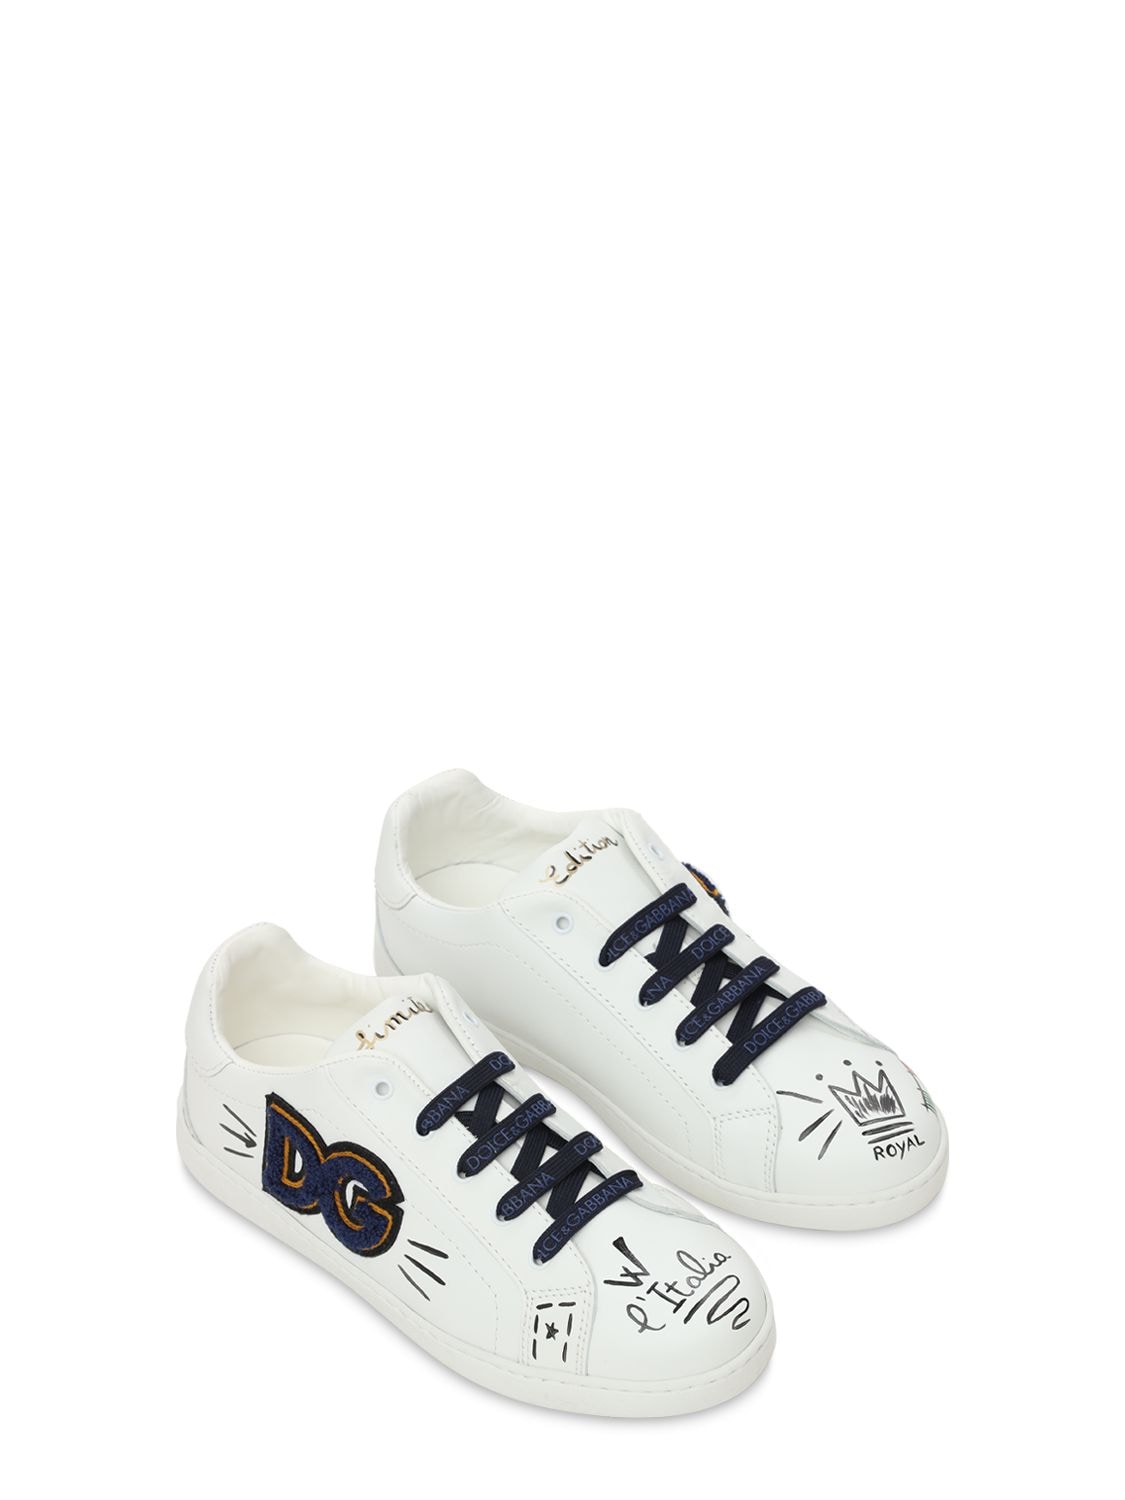 Dolce & Gabbana LEATHER LACE-UP SNEAKERS W/ LOGO PATCH